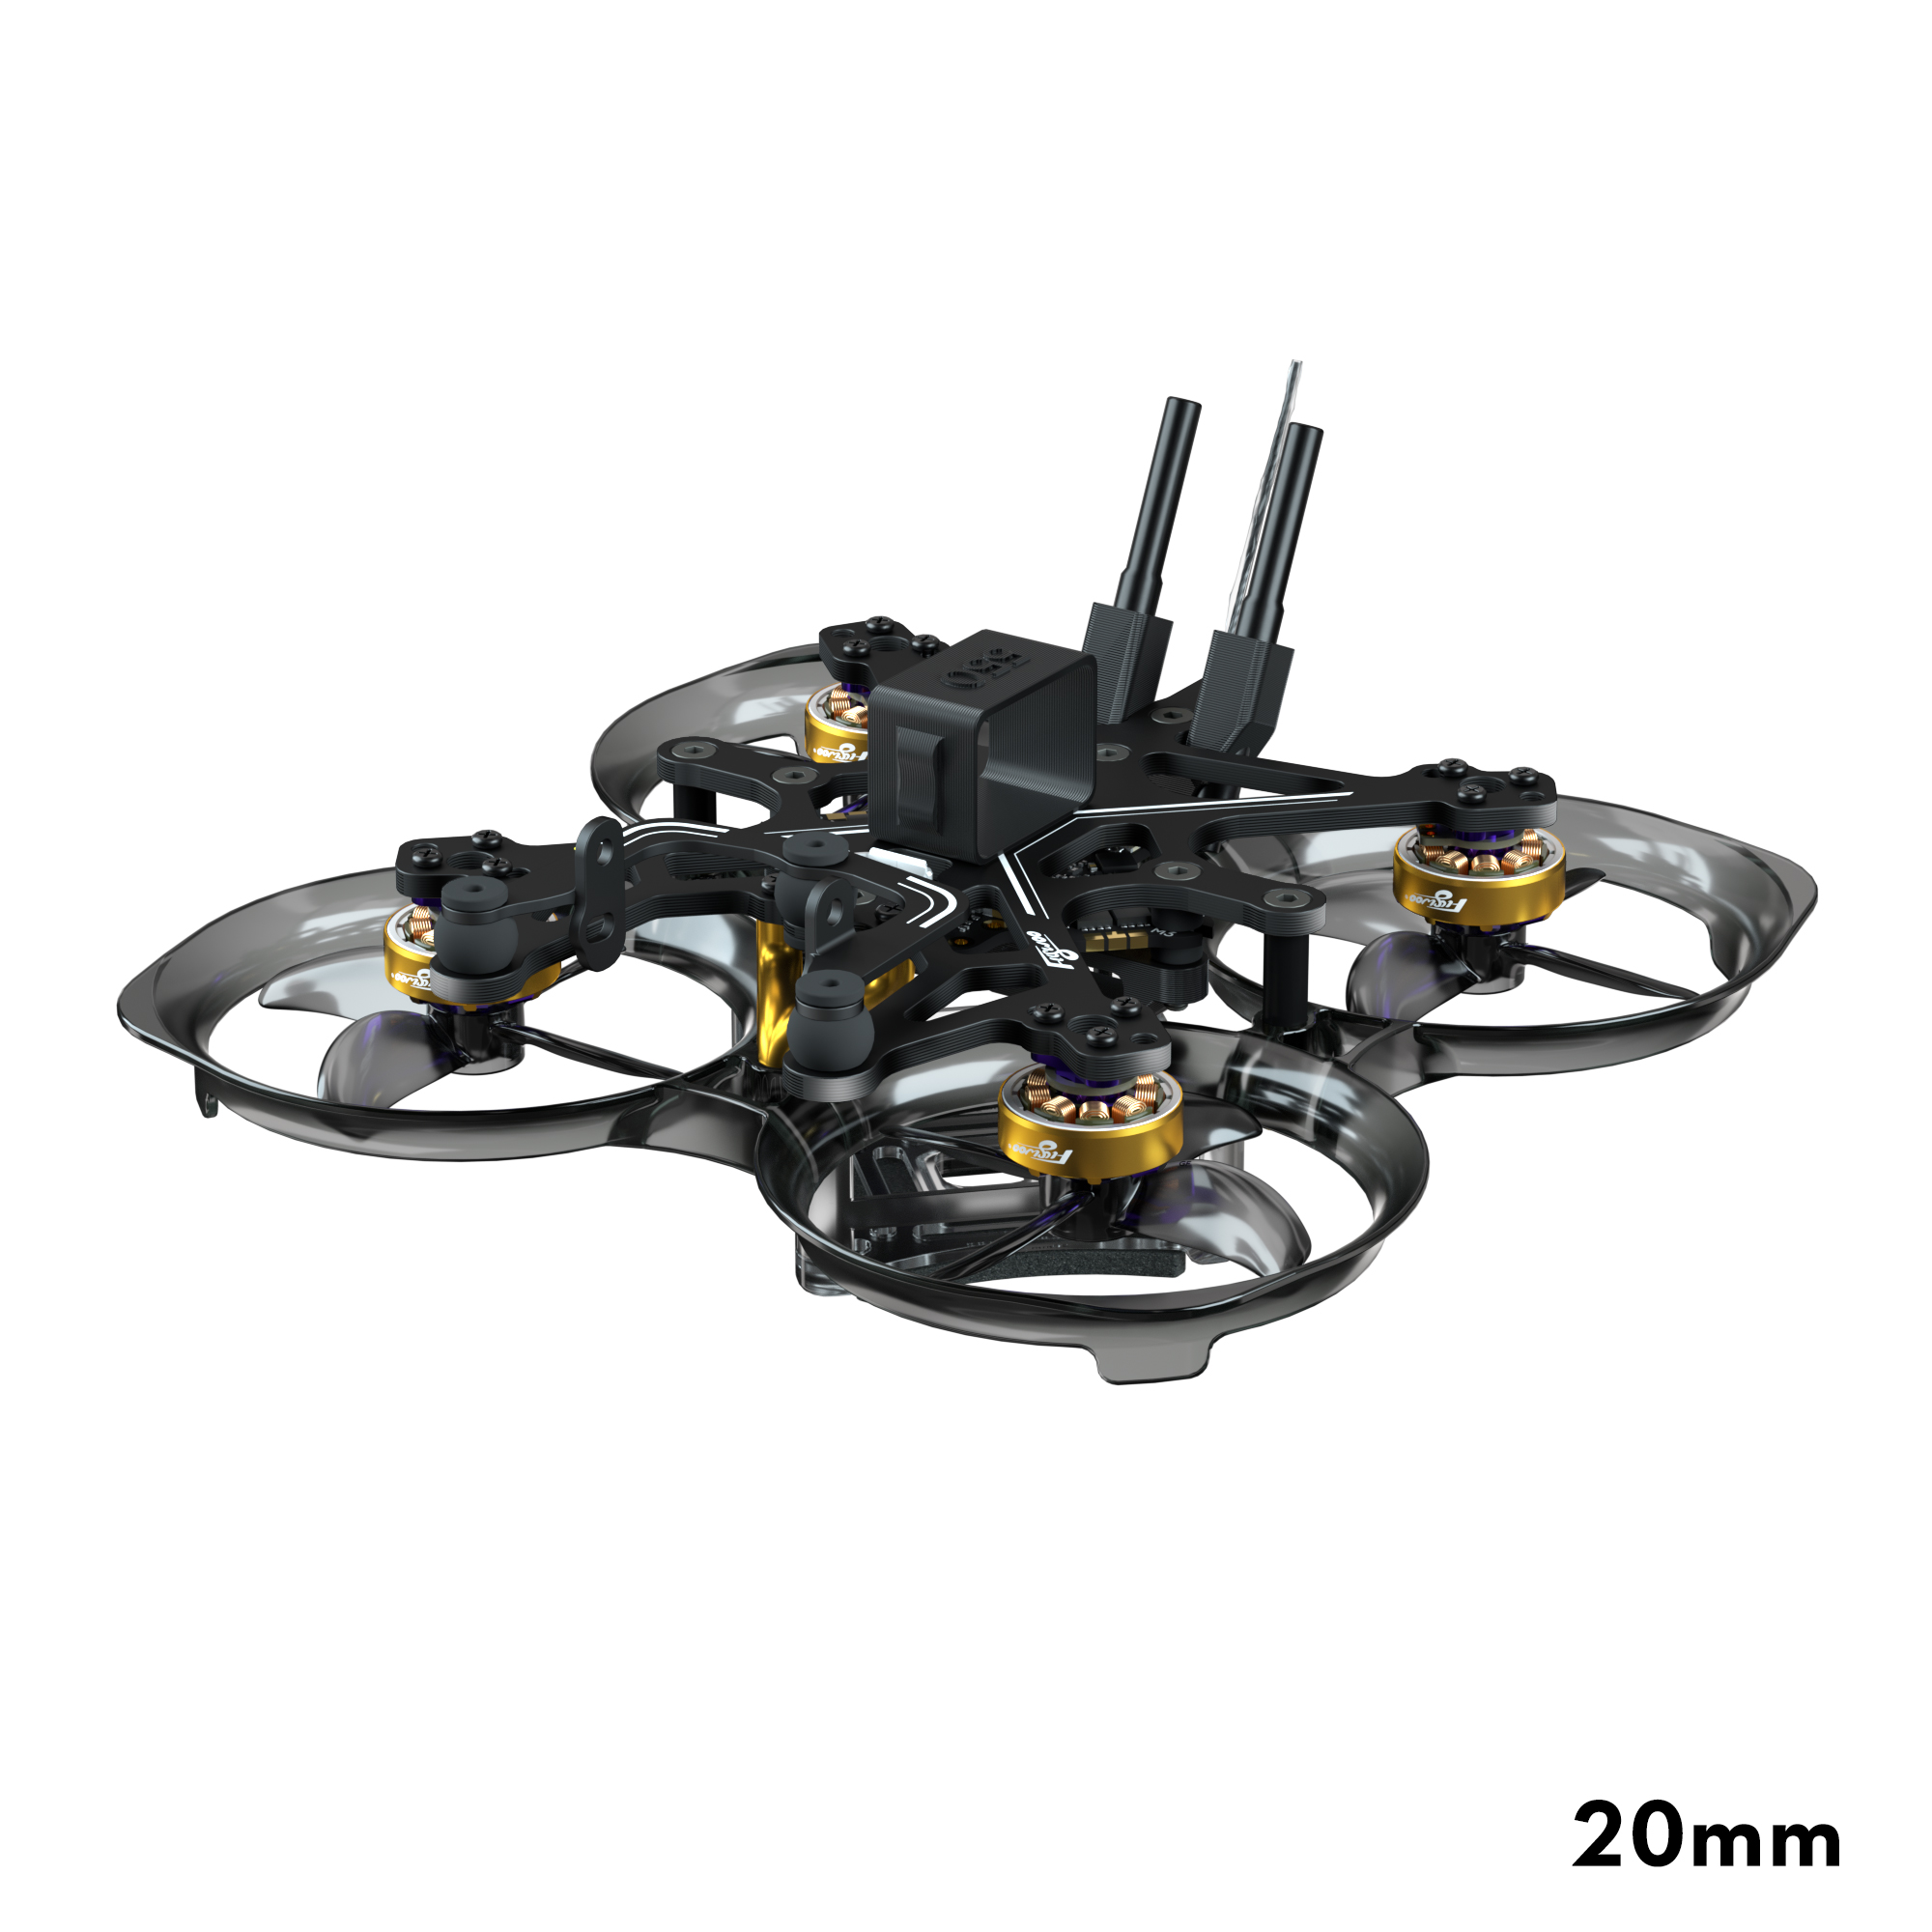 FlyLens 75 HD Drone kit 2S Brushless Whoop FPV Drone